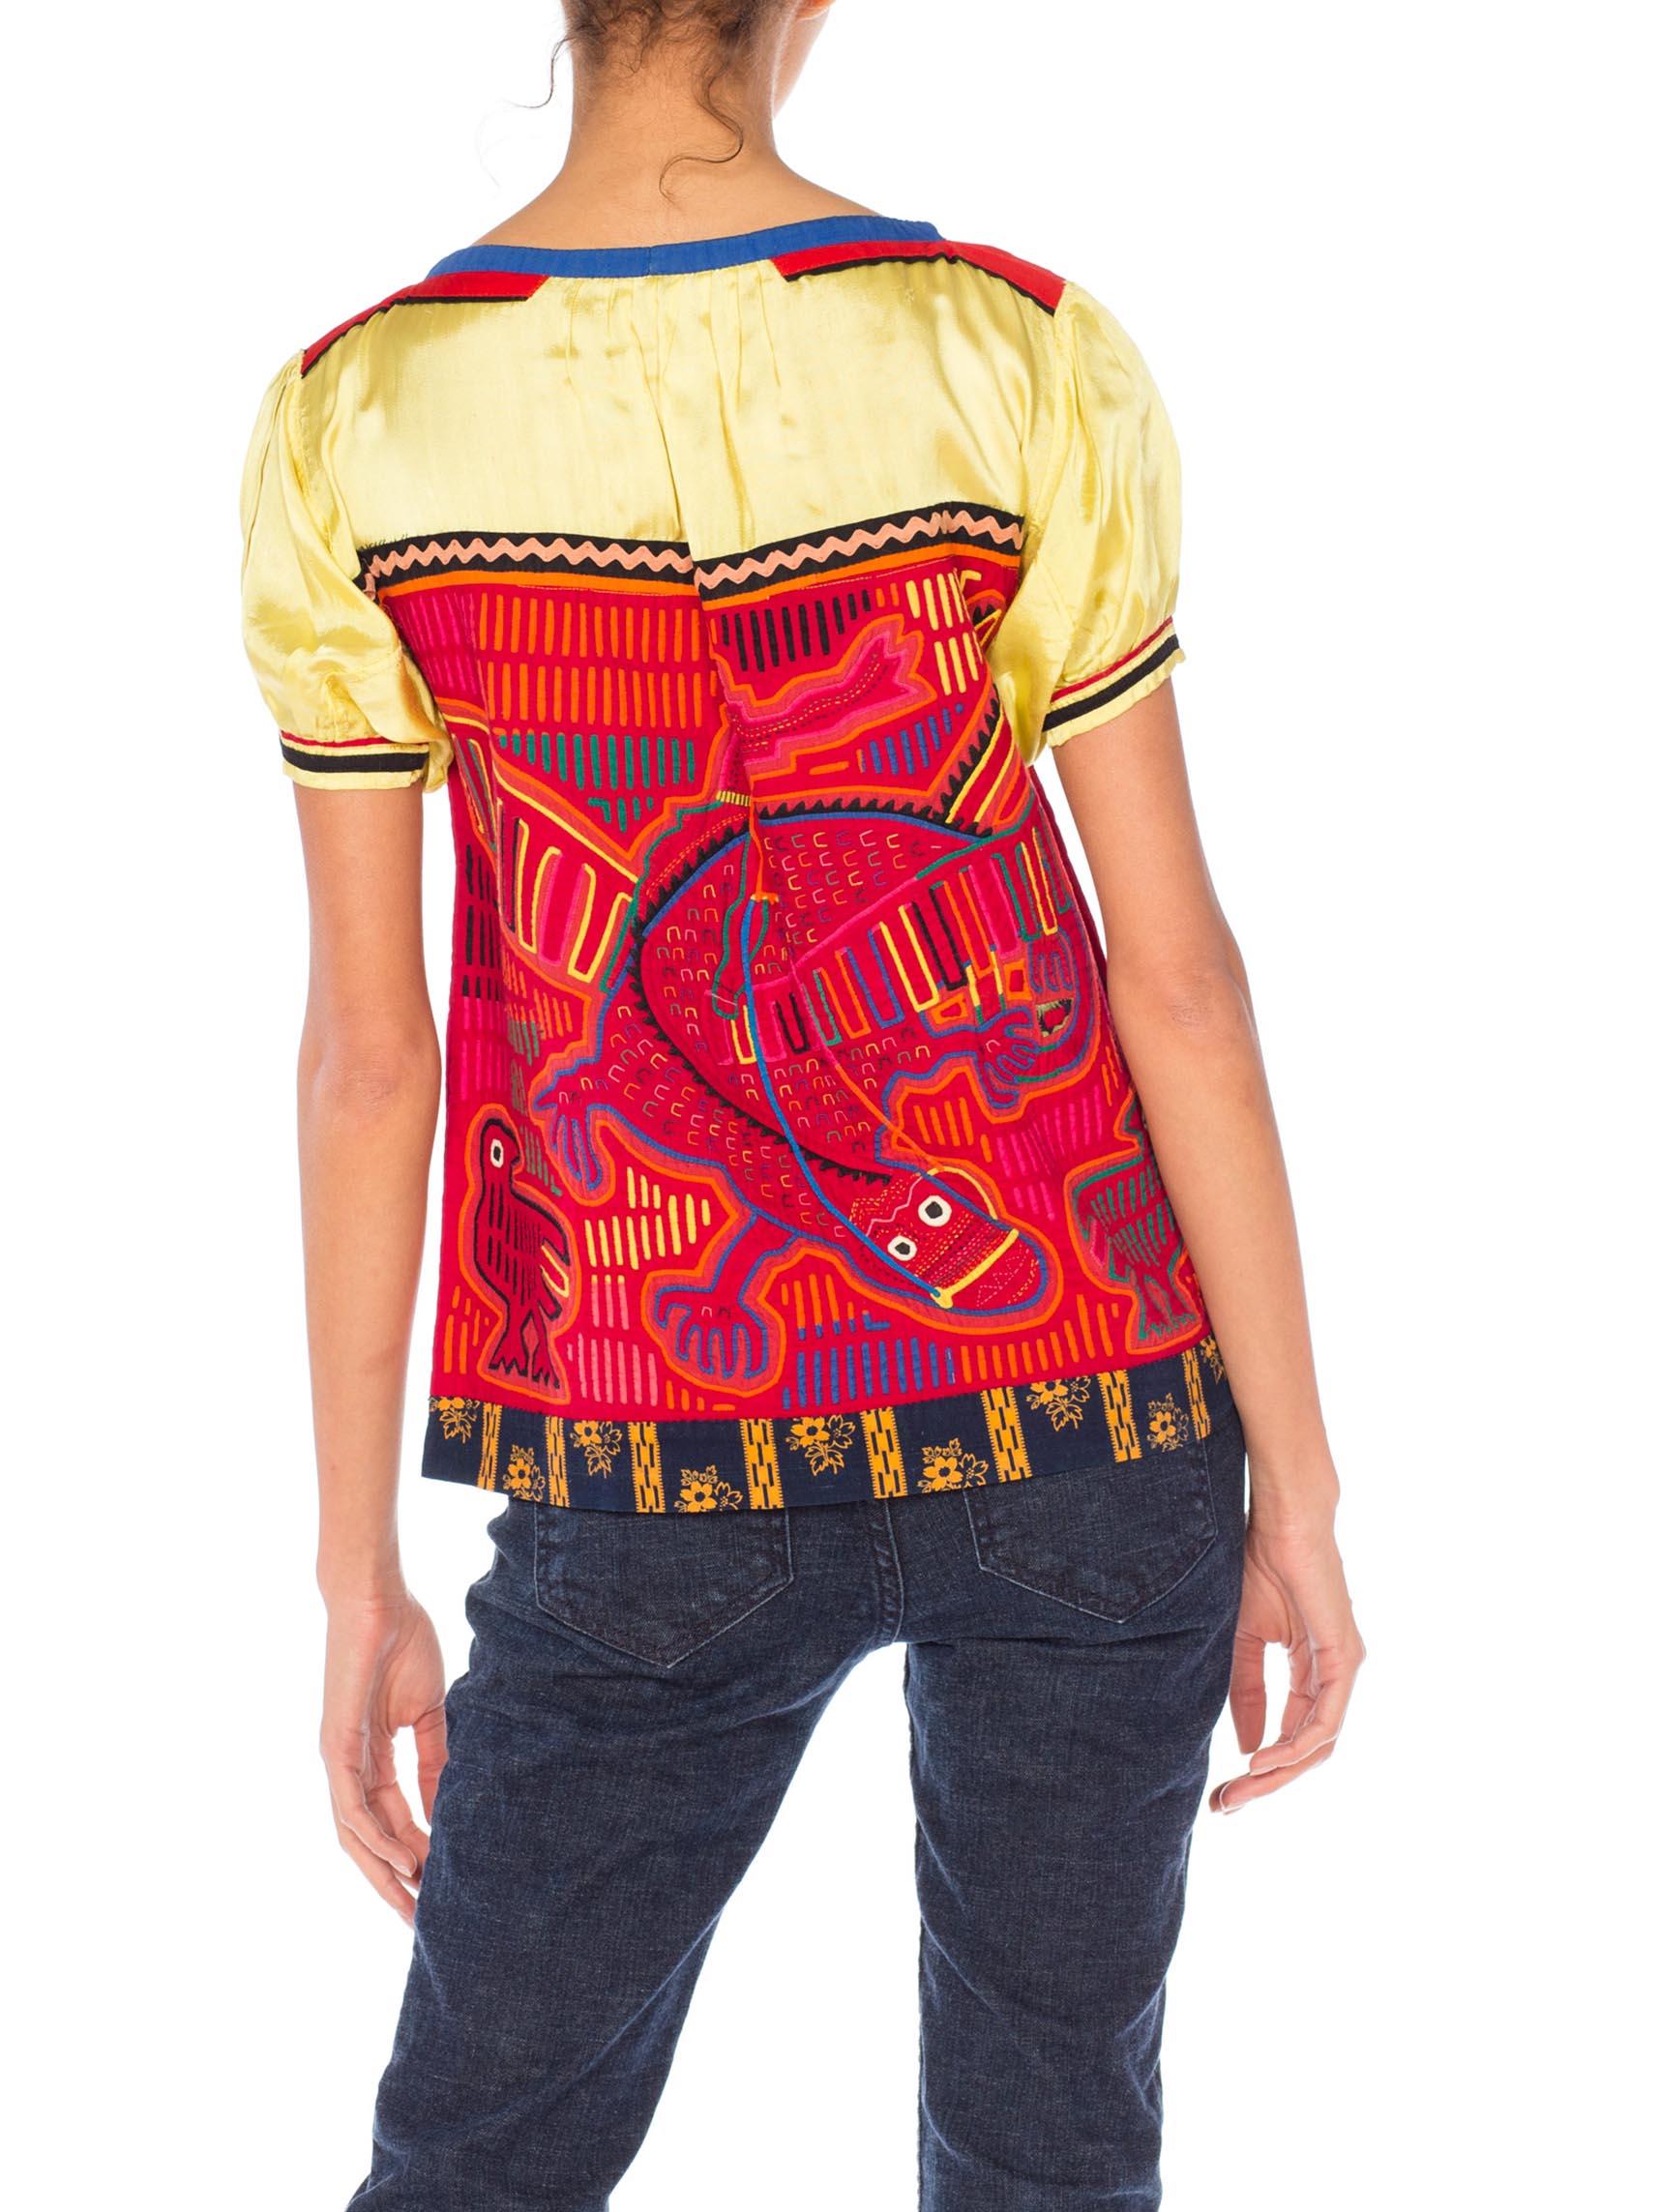 1960S Red & Yellow Cotton South American Top Appliquéd With Lizard And Birds For Sale 3